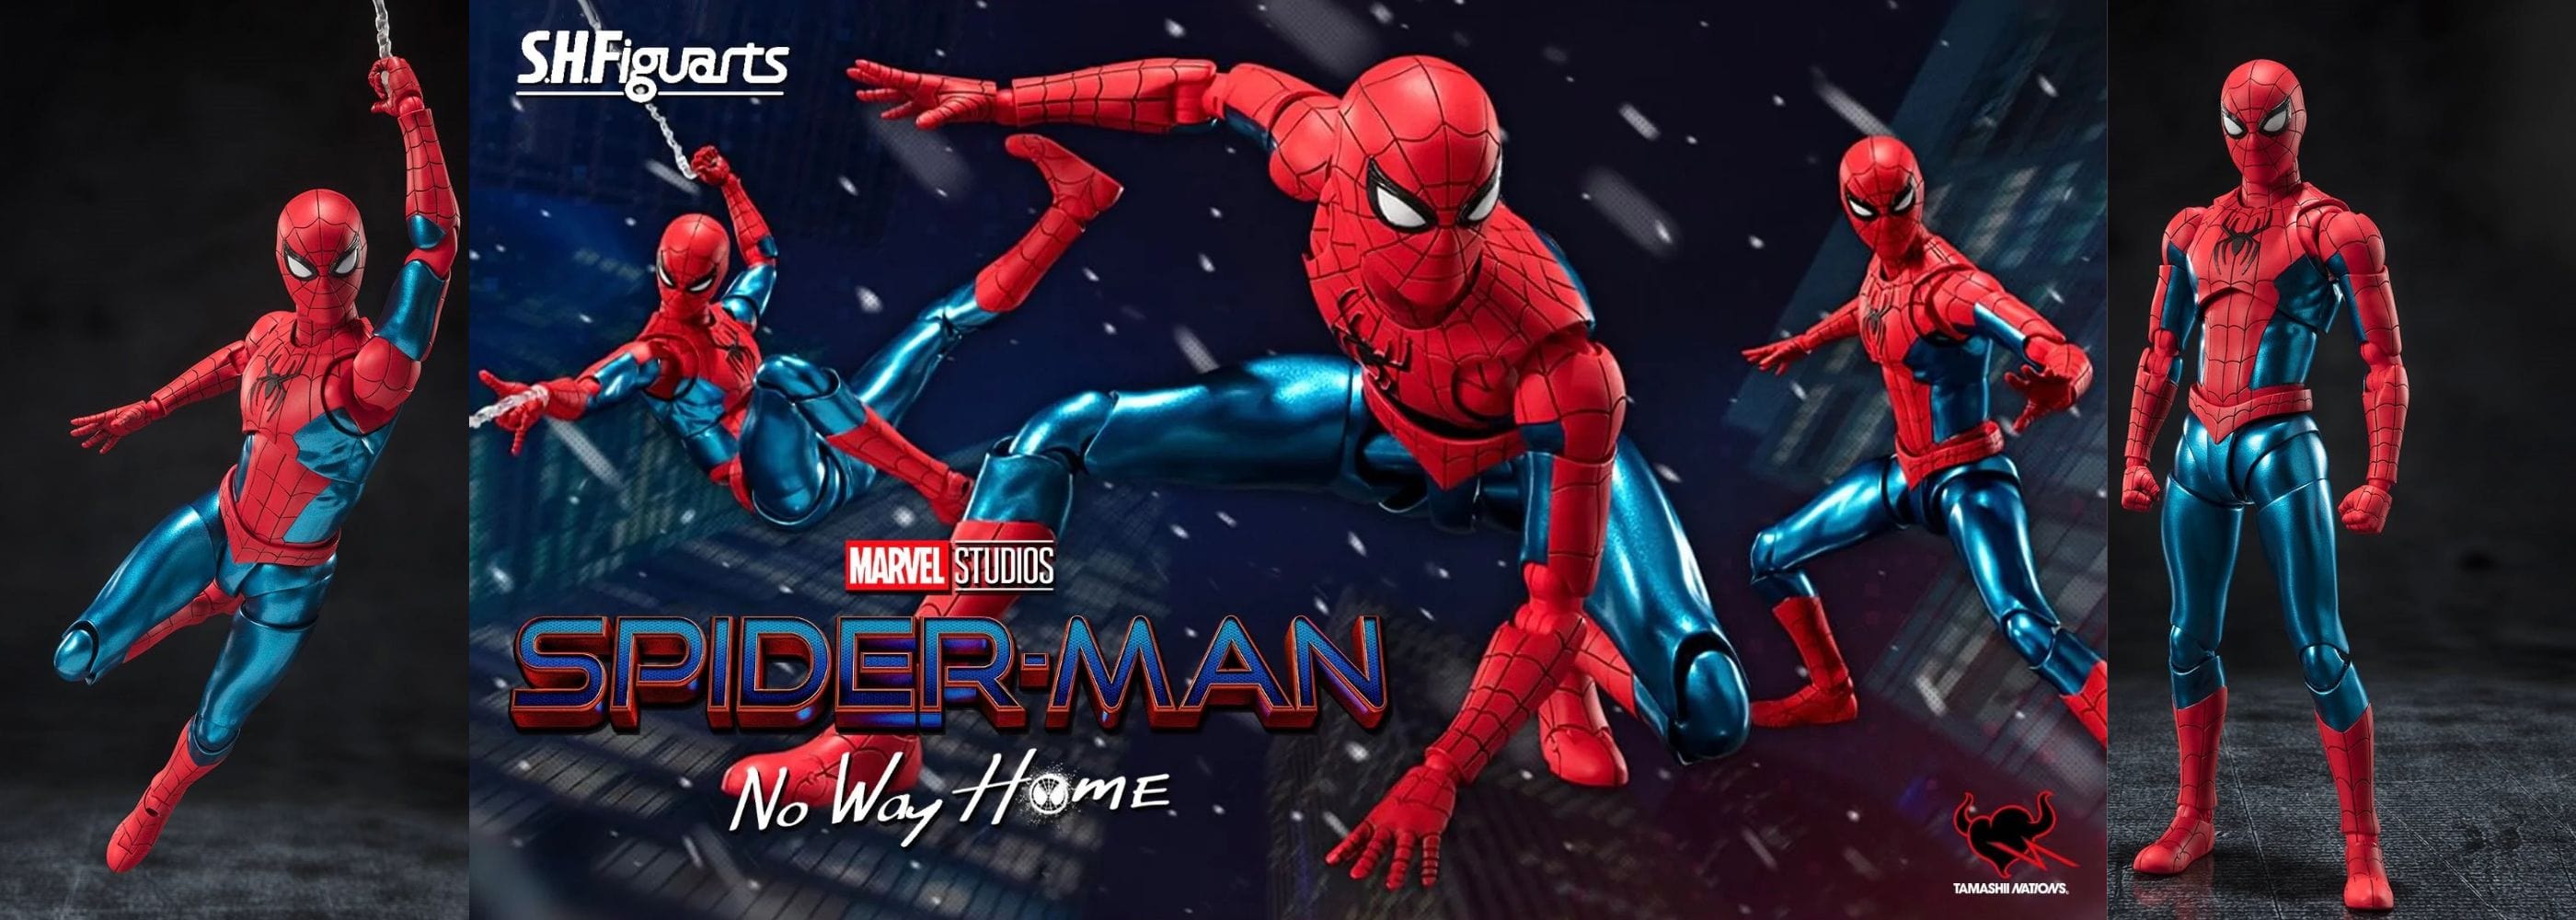 S.H. Figuarts Spider-Man: No Way Home Spider-Man (New Red and Blue Suit) Action Figure